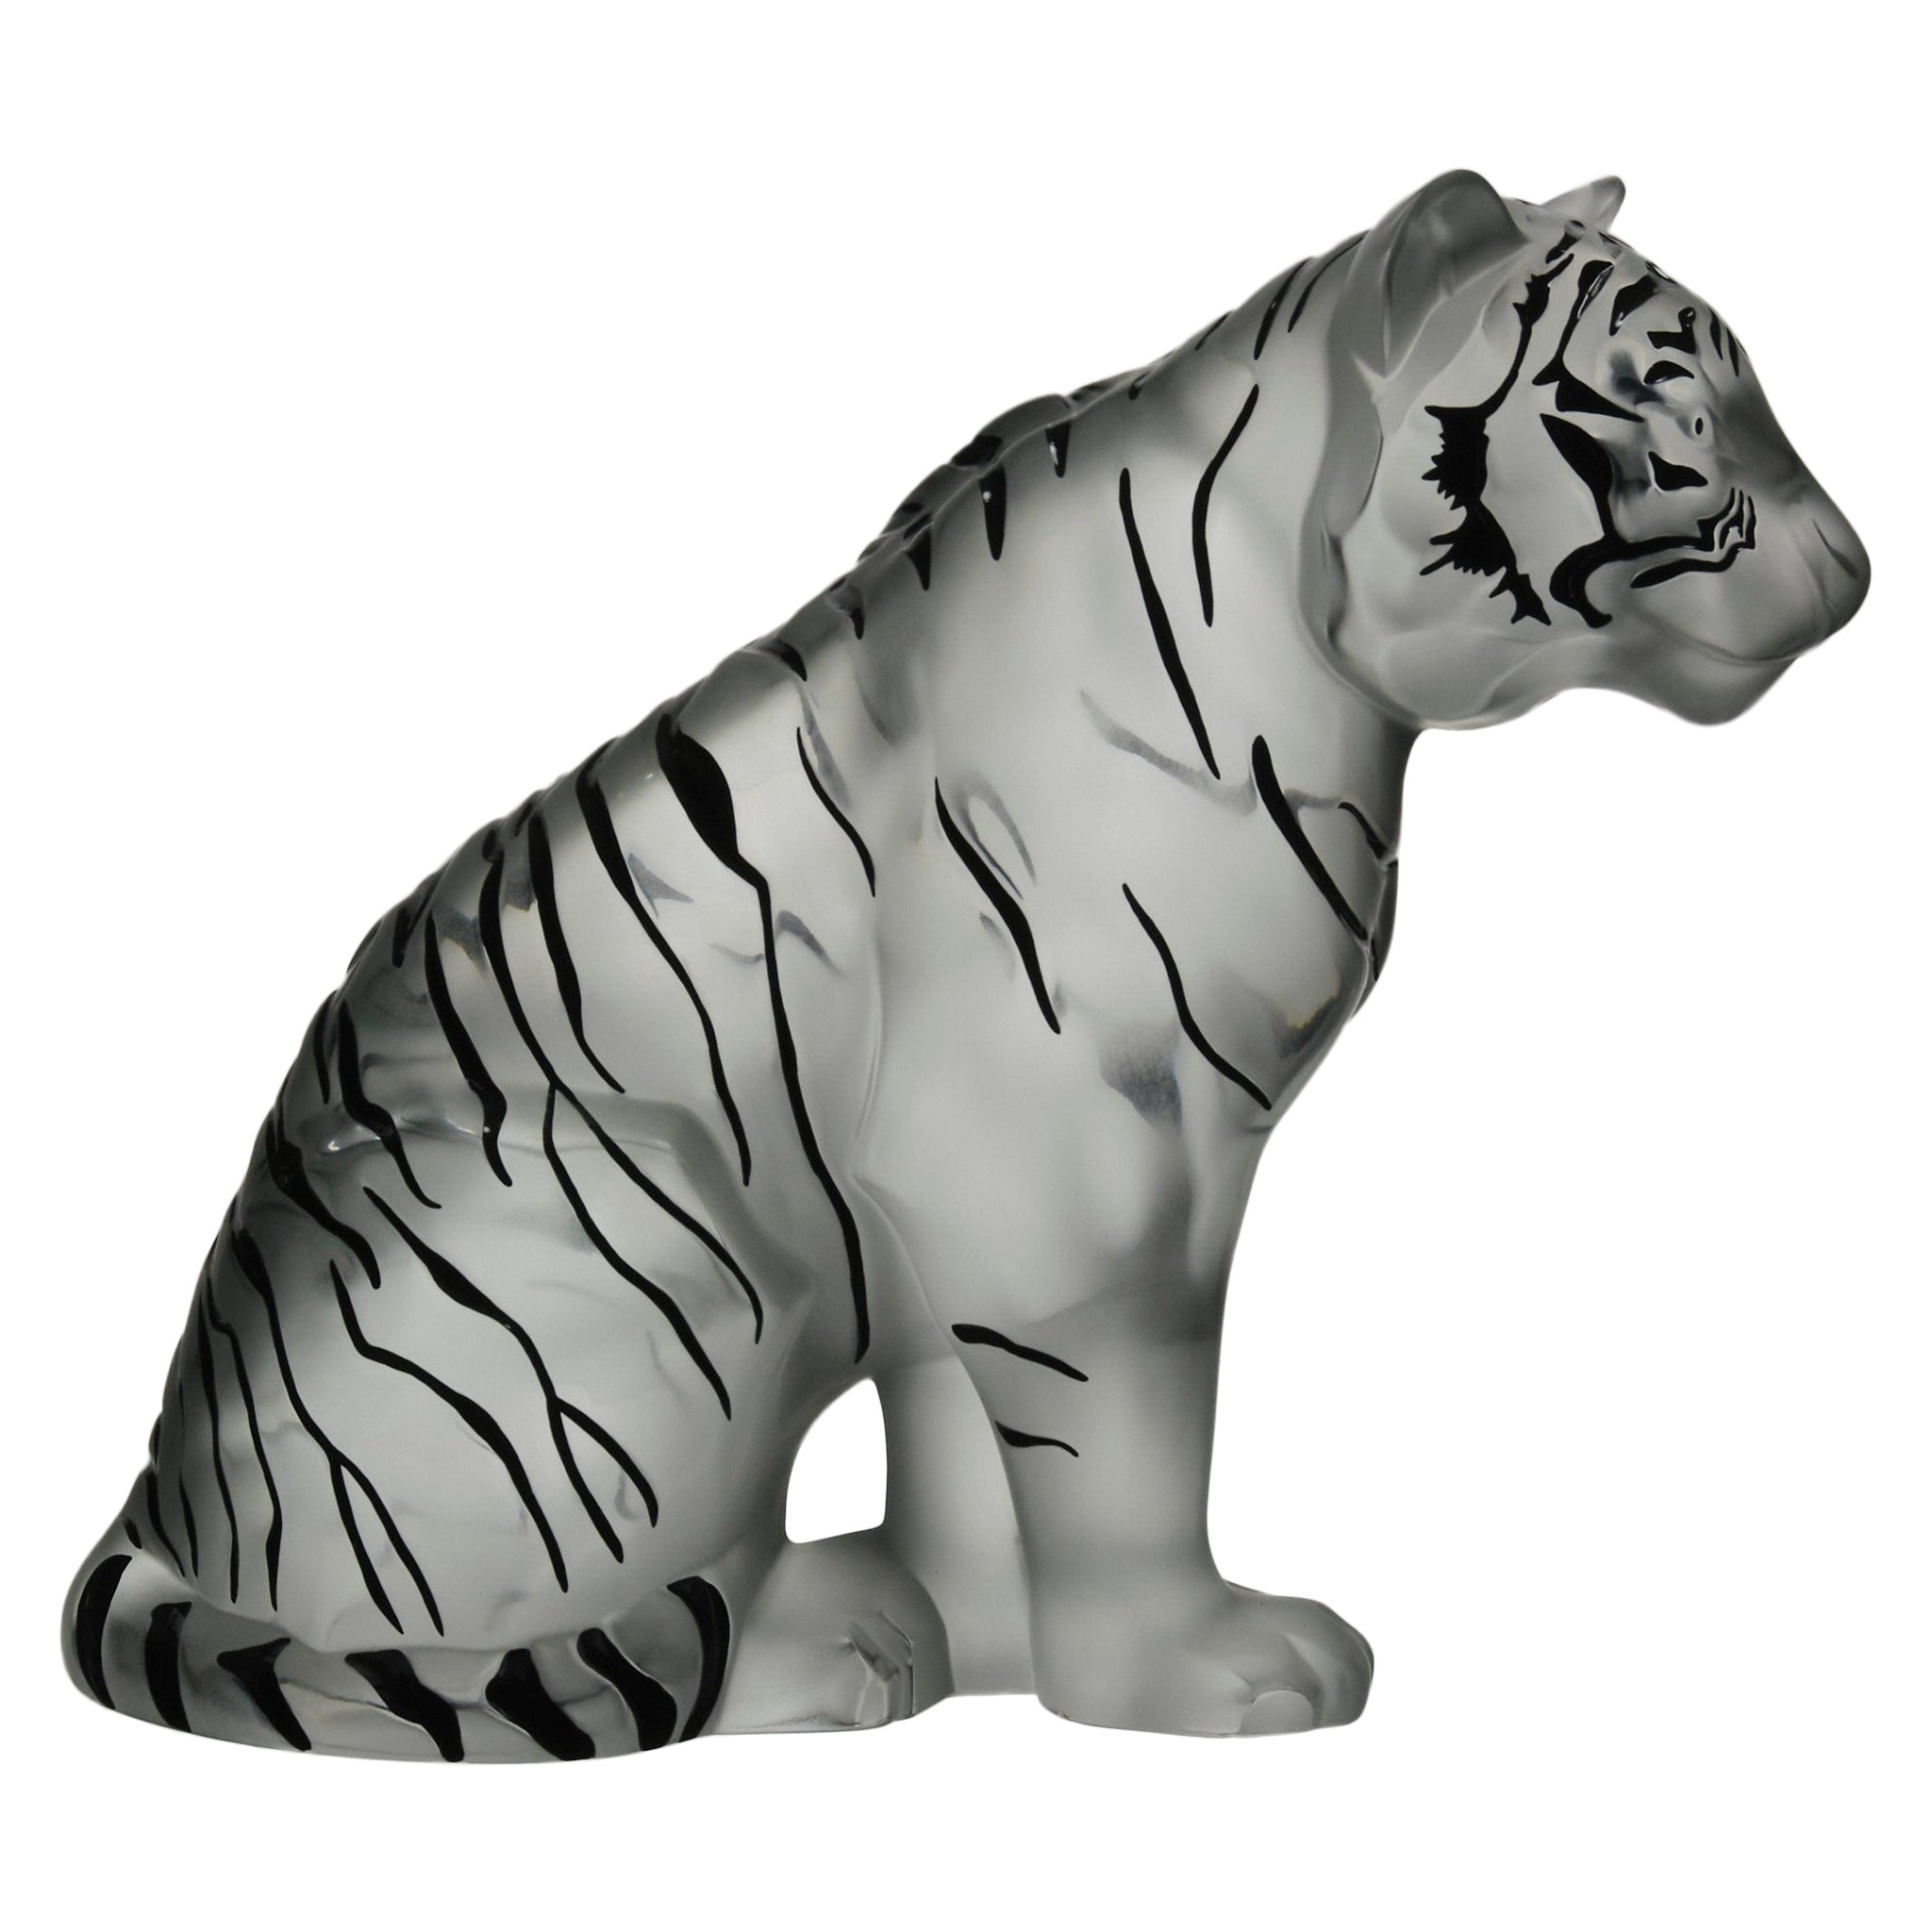 Late 20th Century Glass Sculpture Entitled "Tigre Assis" by Lalique For  Sale at 1stDibs